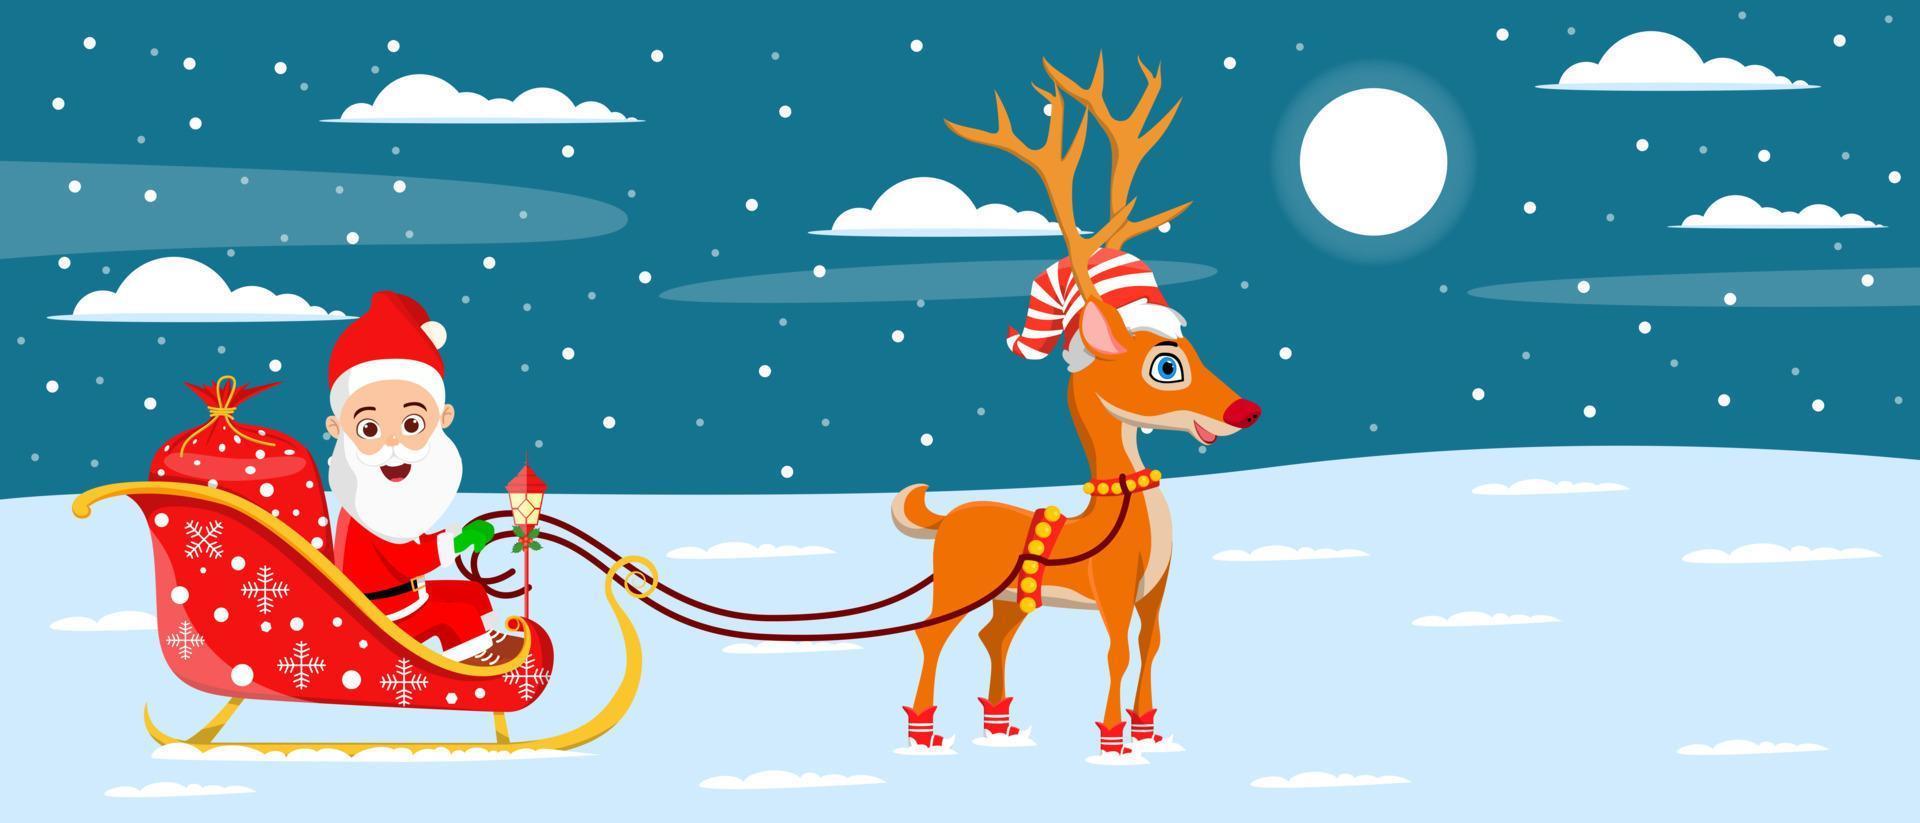 Beautiful Santa Clause character with  sleigh standing with reindeer on snow field in night background snow falling vector